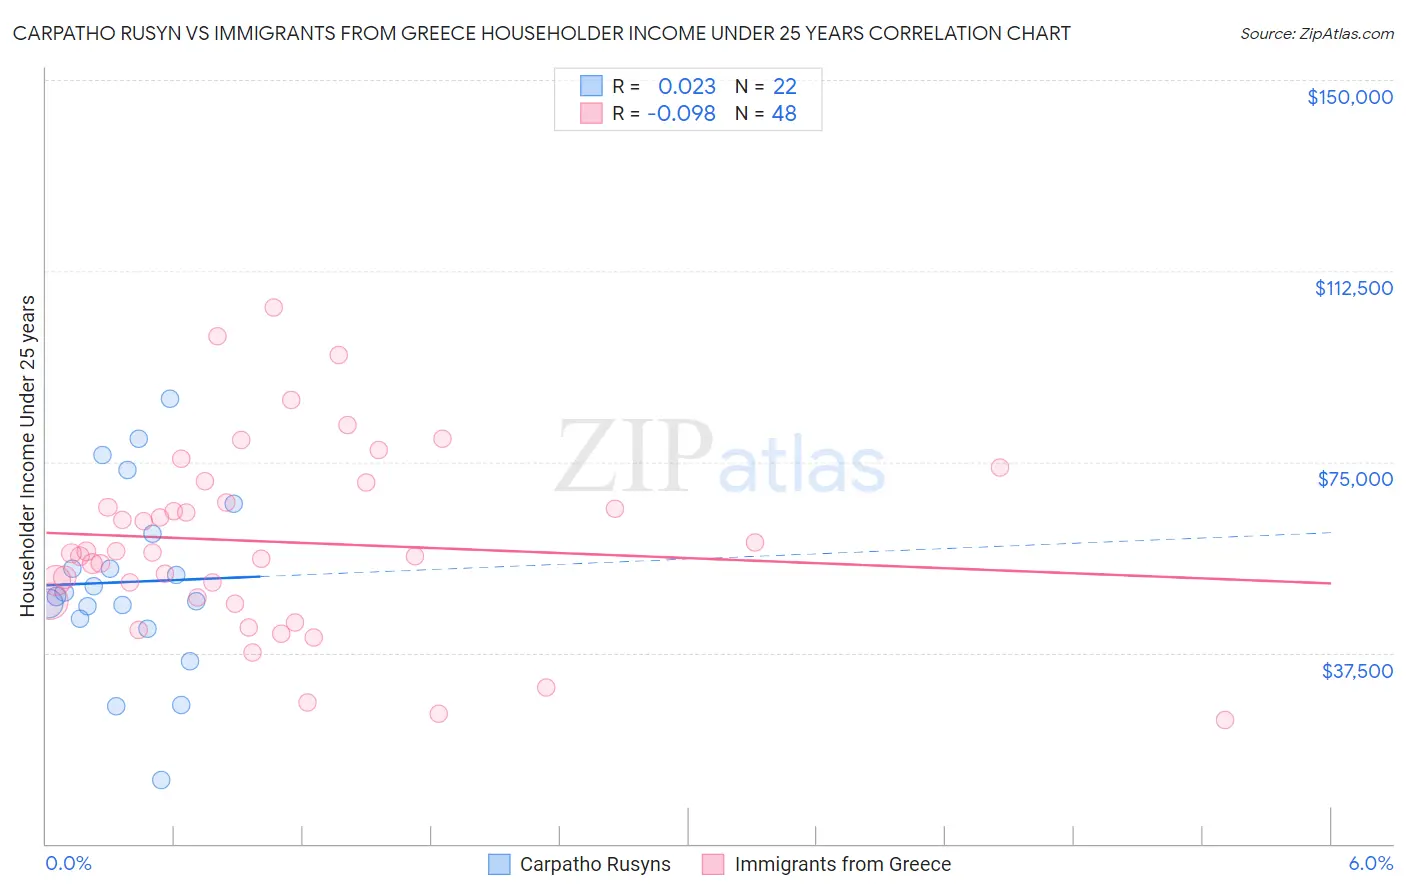 Carpatho Rusyn vs Immigrants from Greece Householder Income Under 25 years